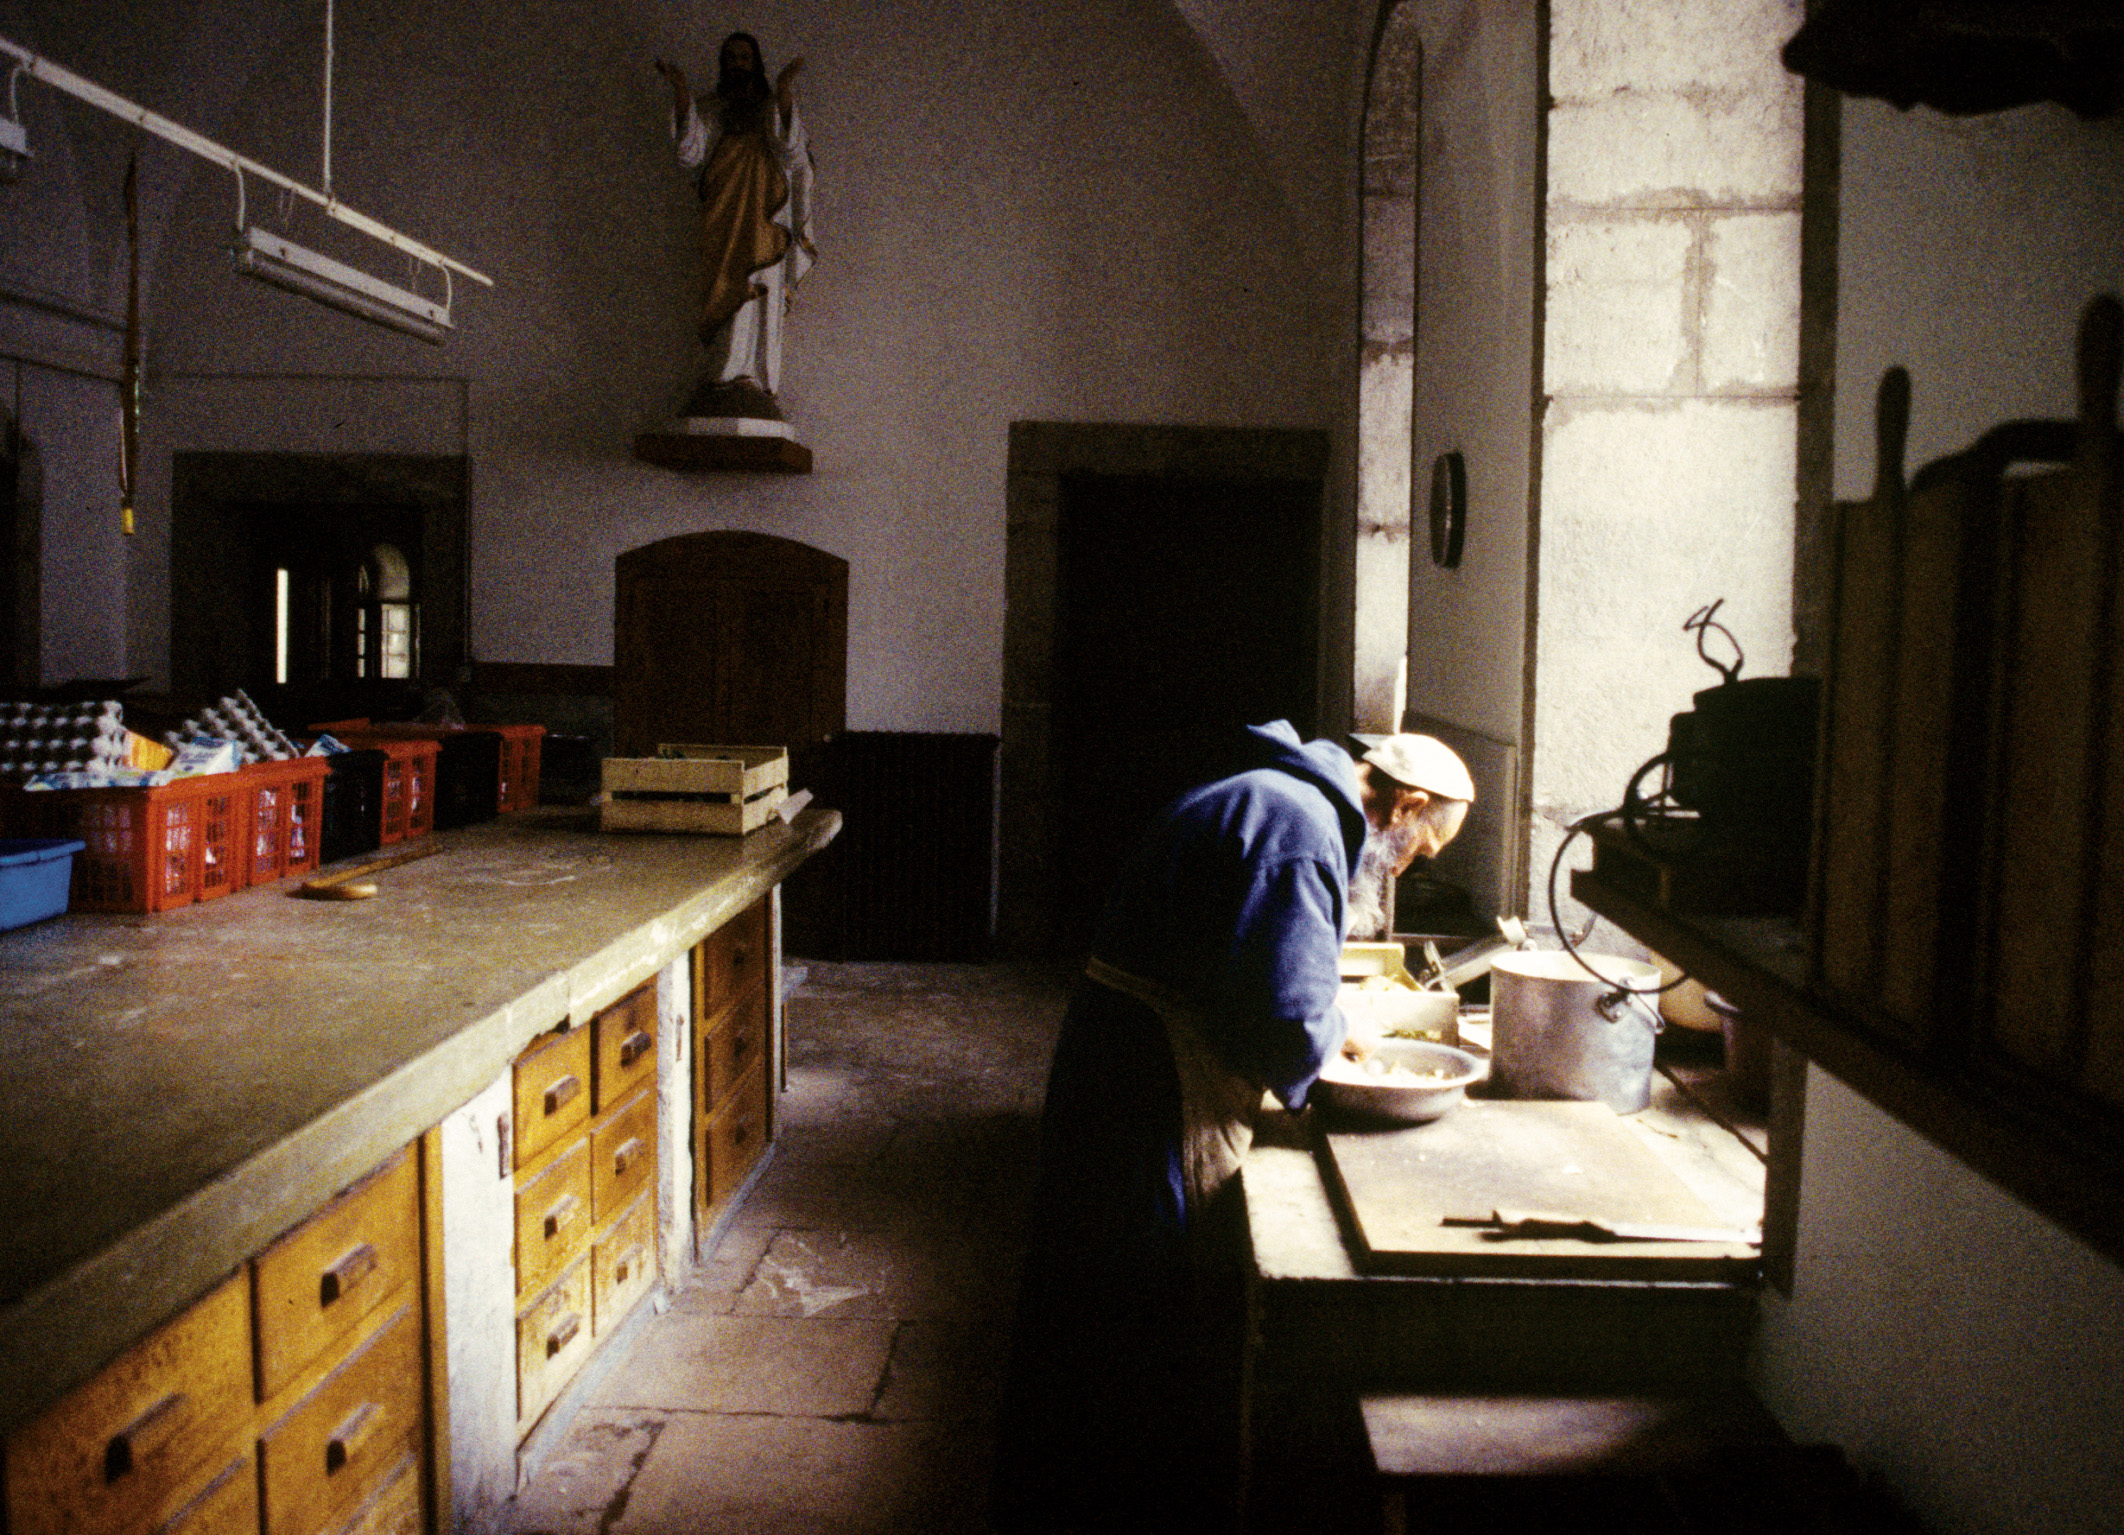 Person in traditional dress kneading dough in a rustic kitchen with religious statue in background